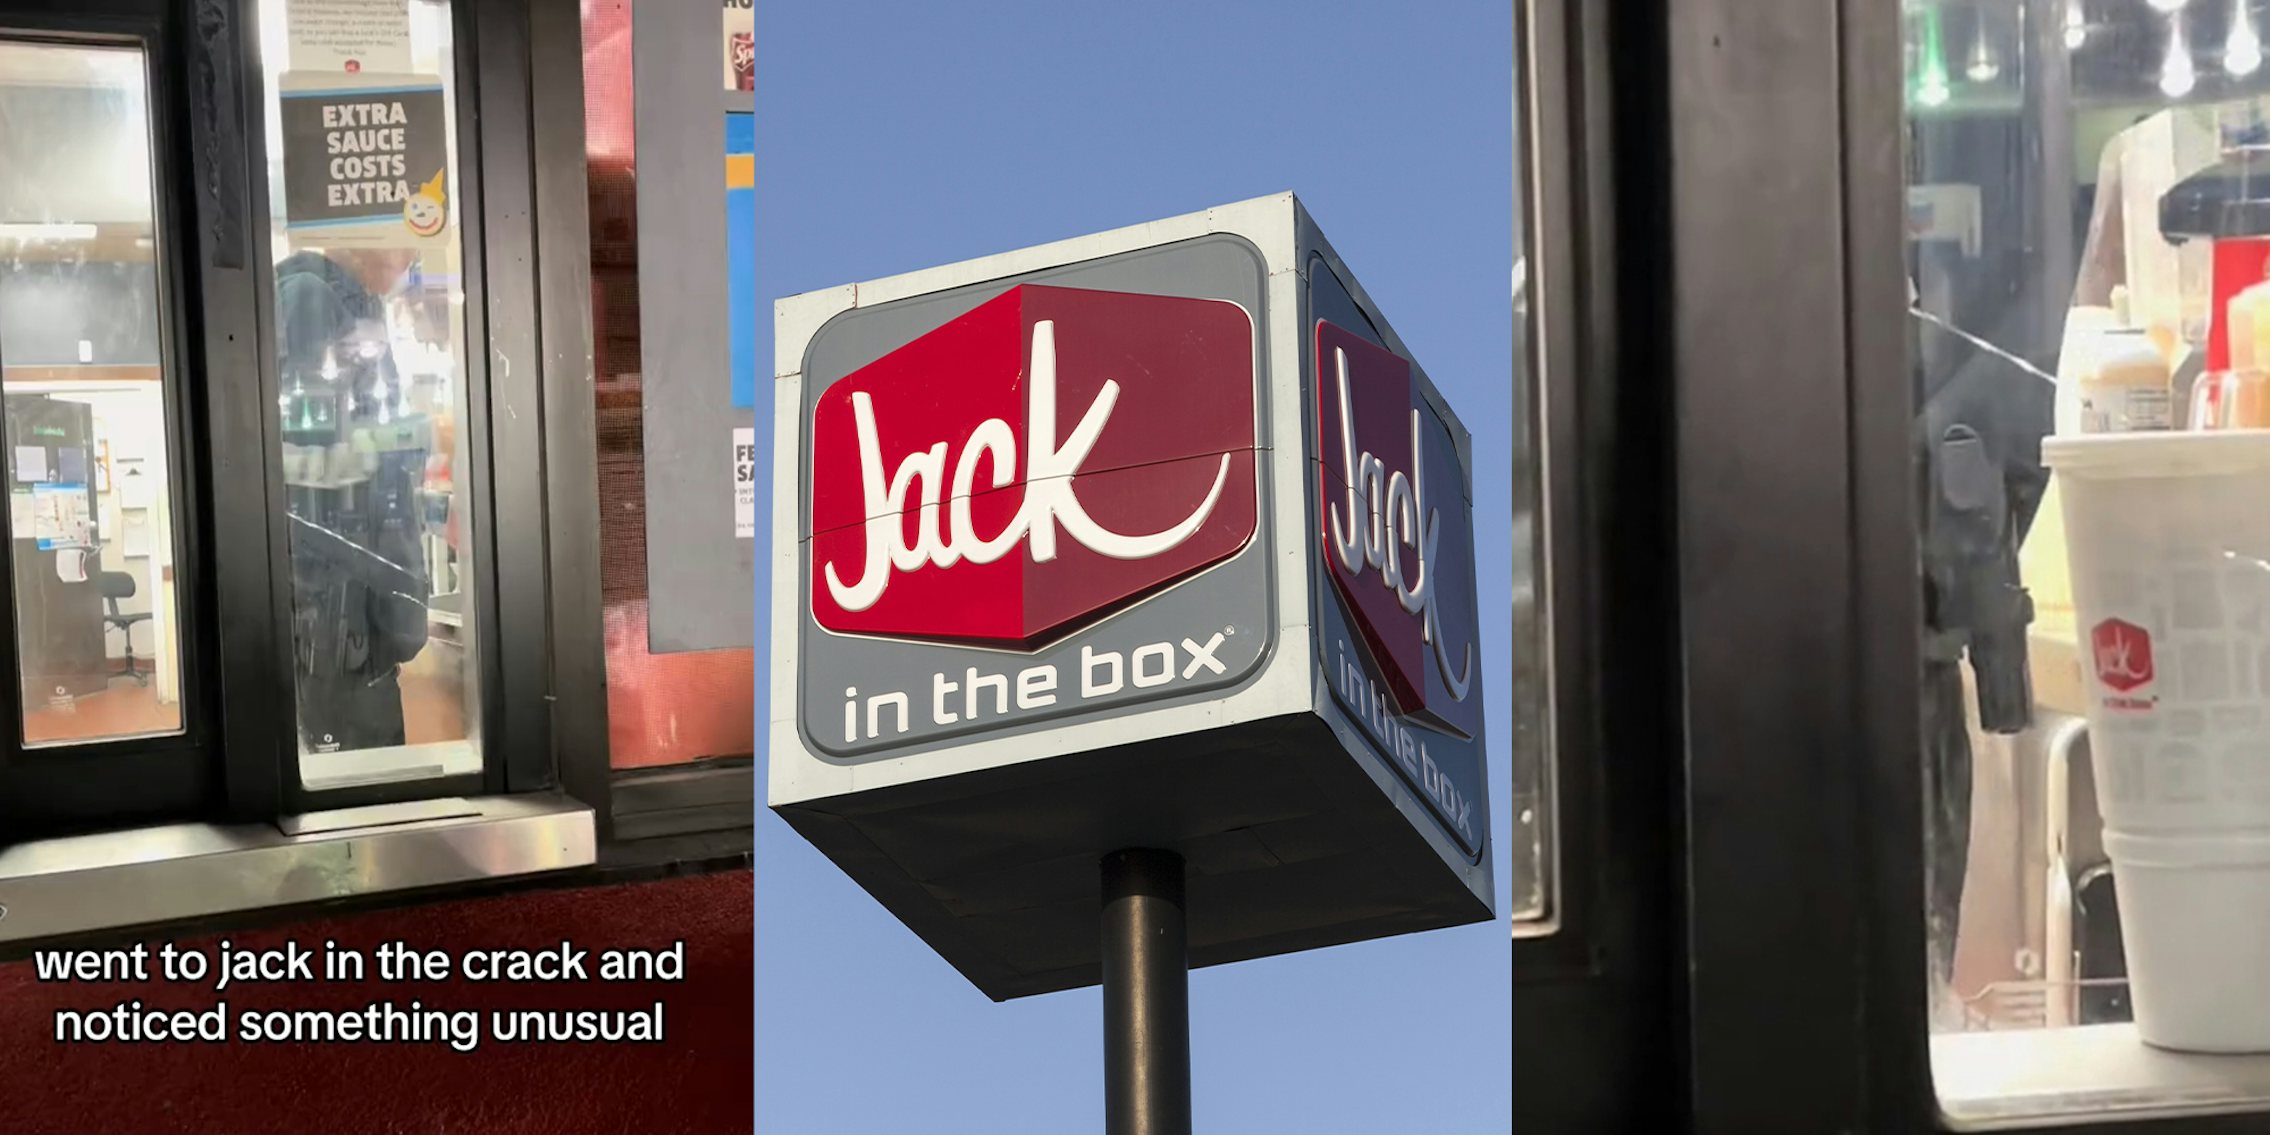 Jack in the Box worker opn carries gun during night shift; jack in the box sign